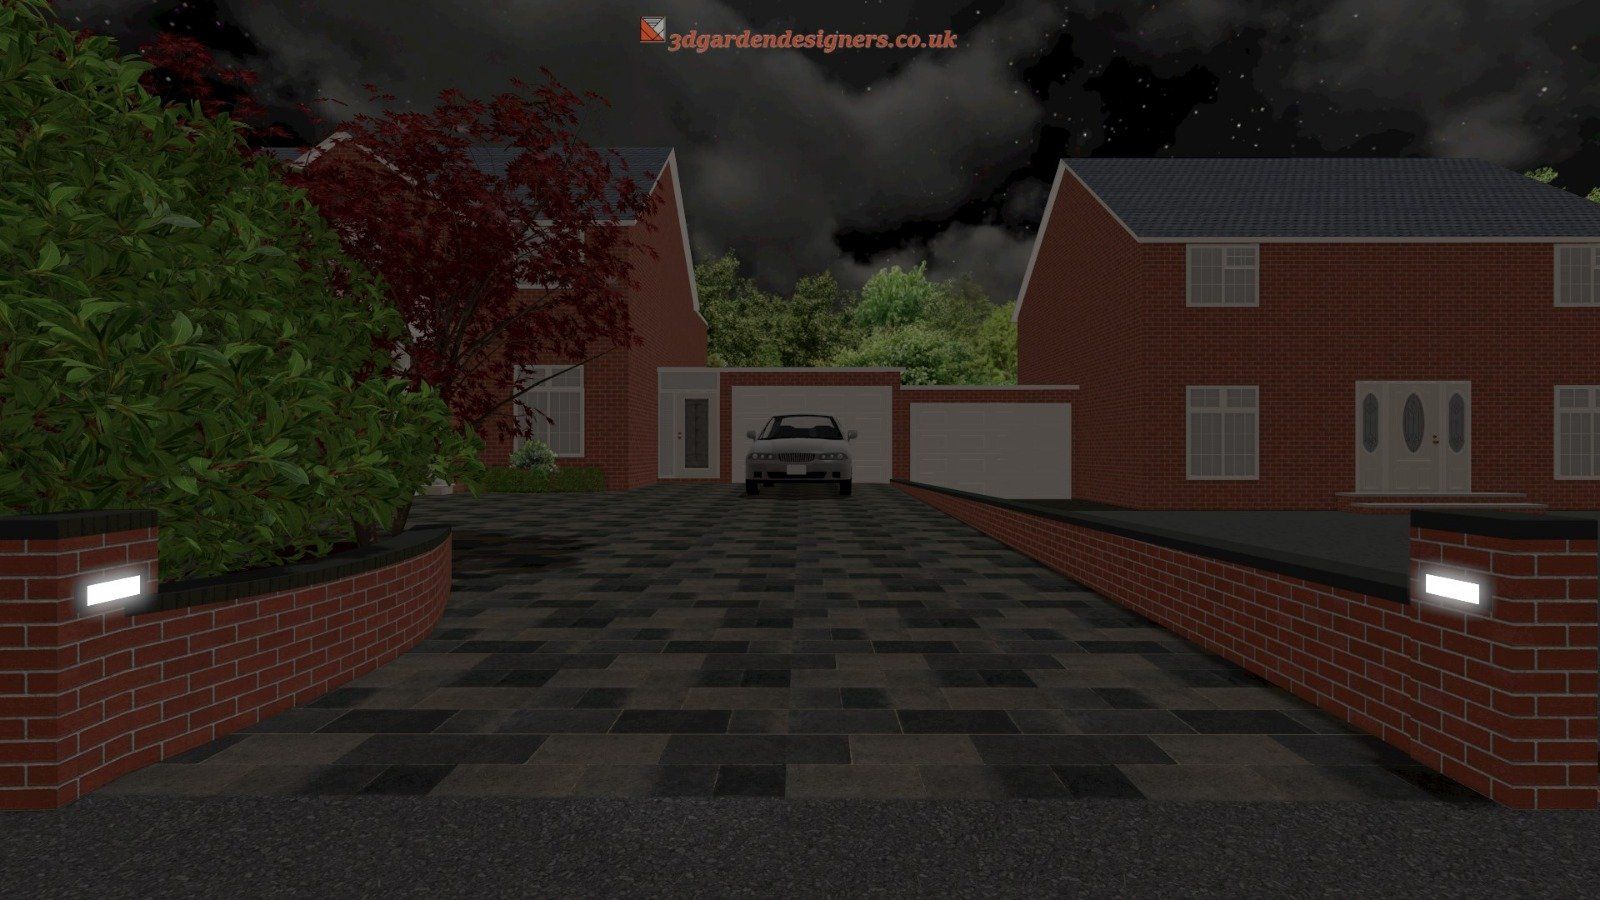 driveway design and walls and lighting